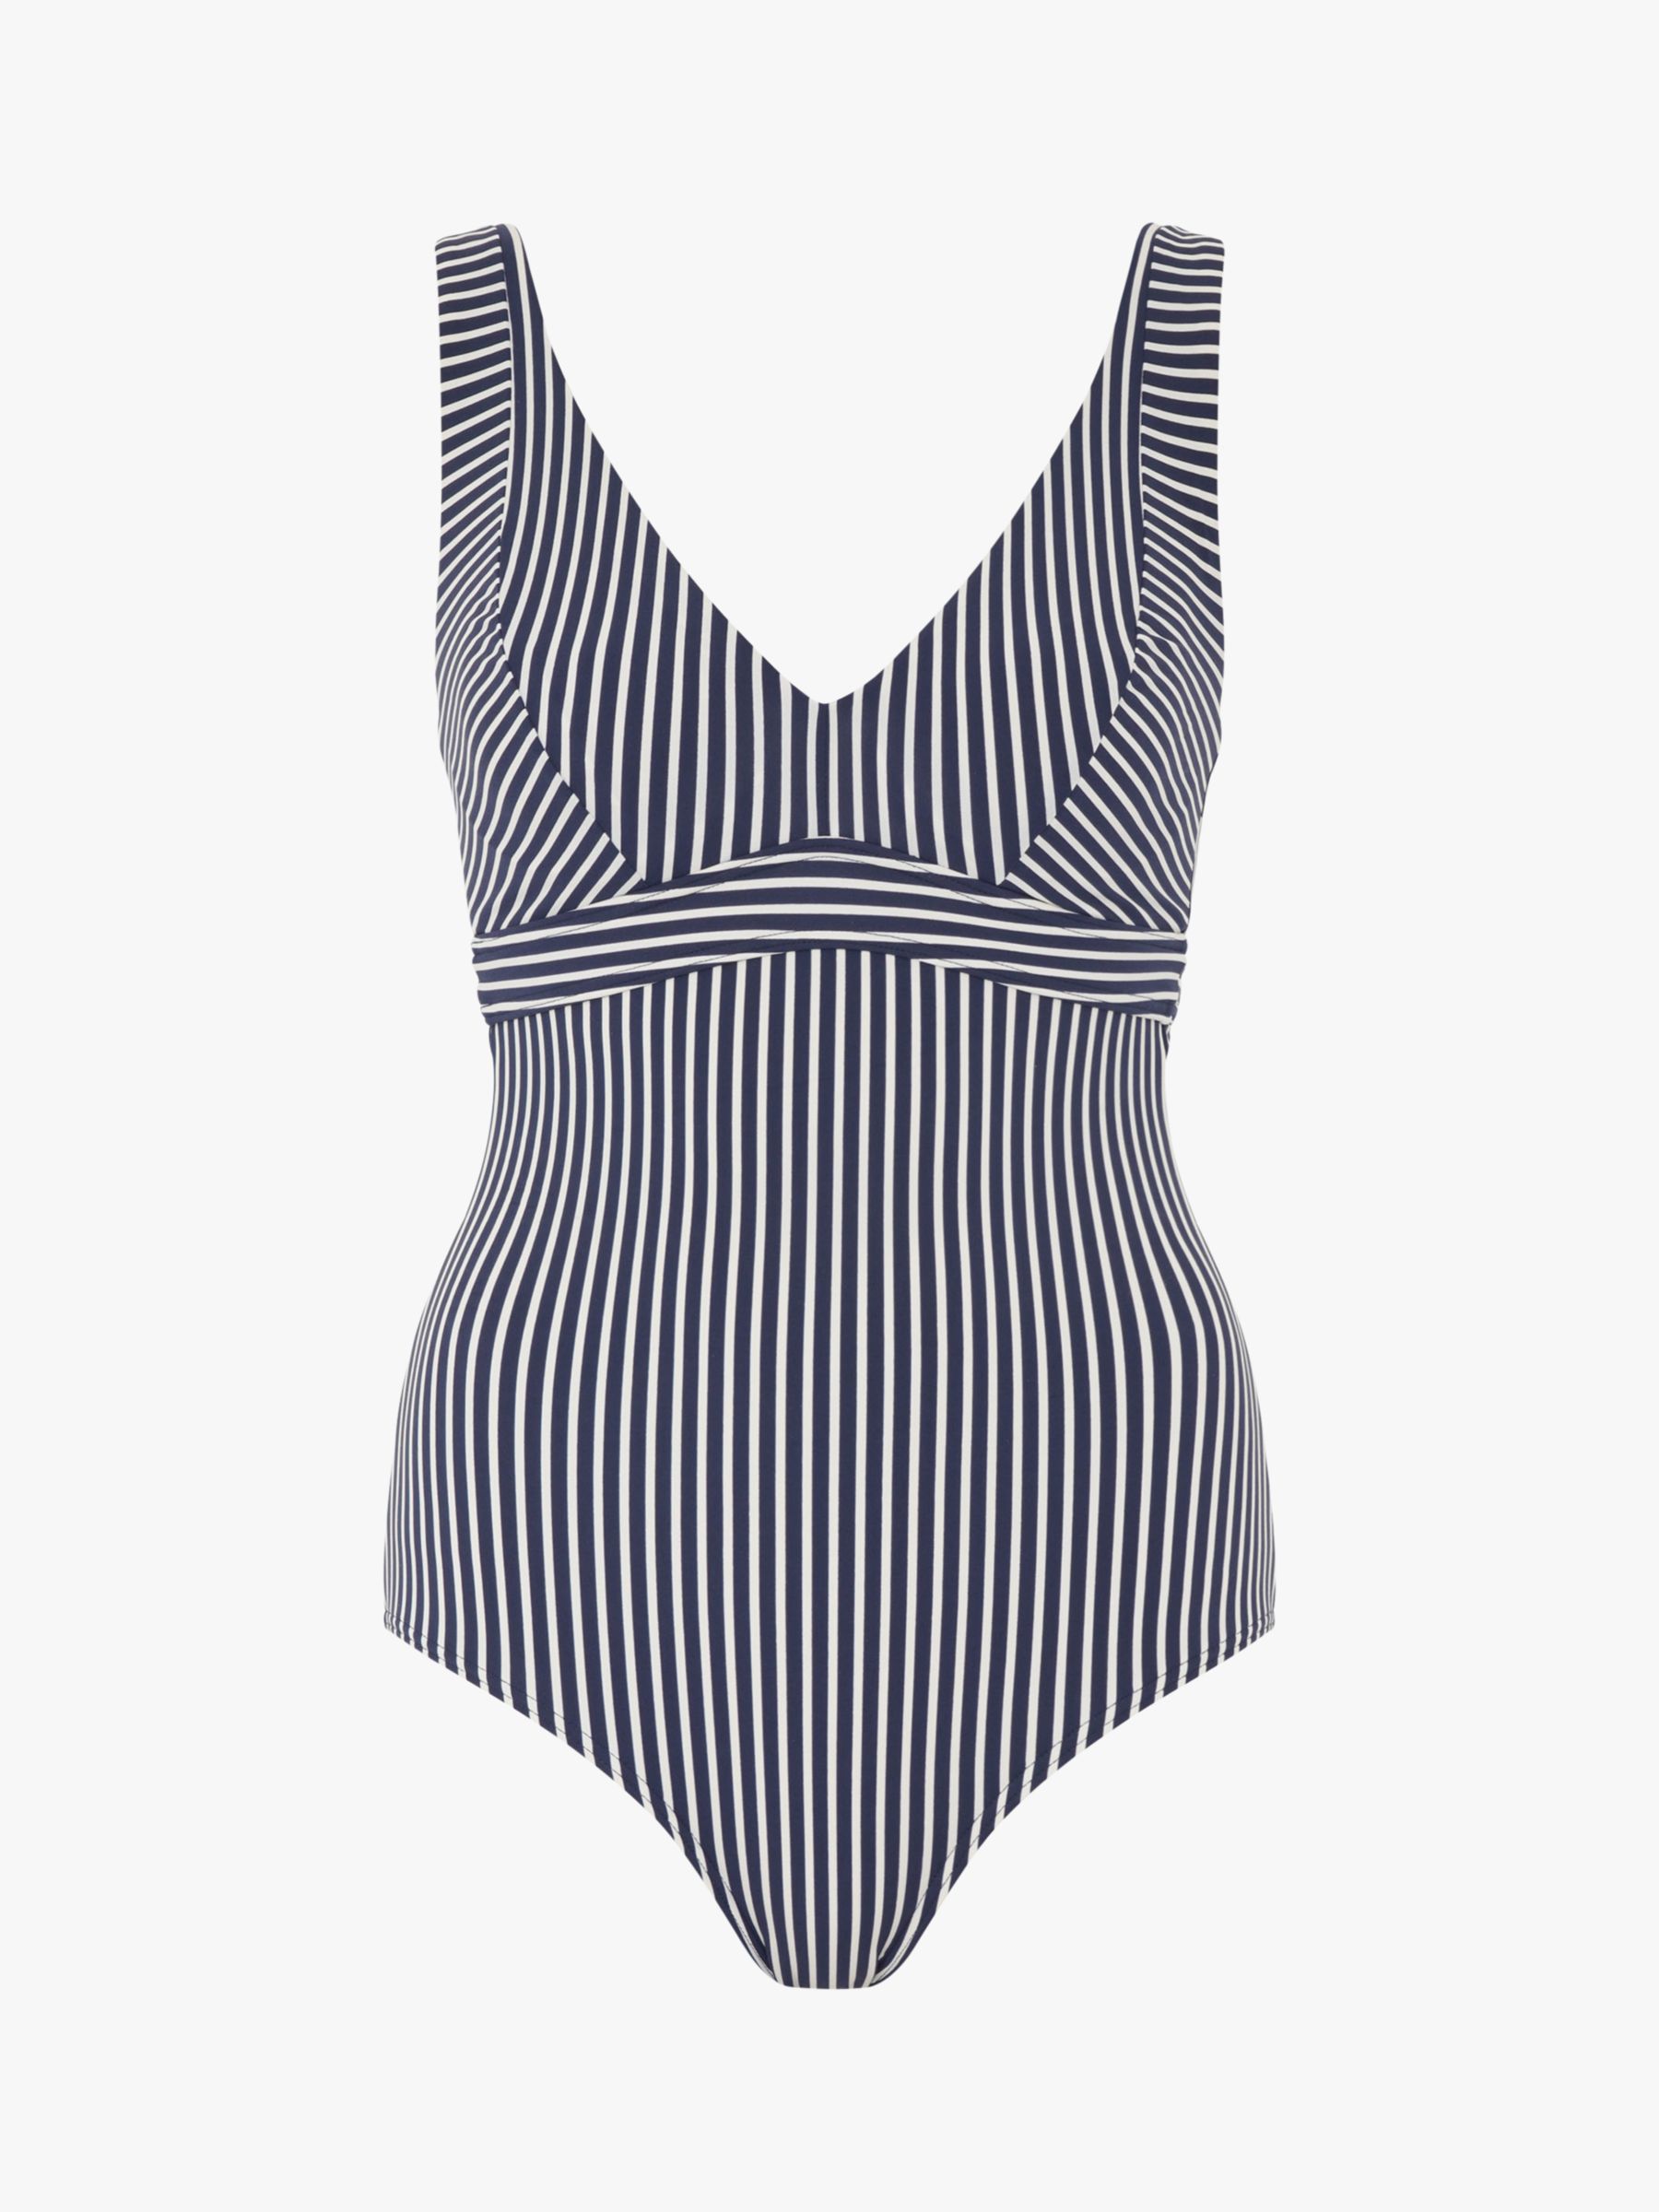 Personality recommendation Chanel Maillots de bain Polyamide Noir